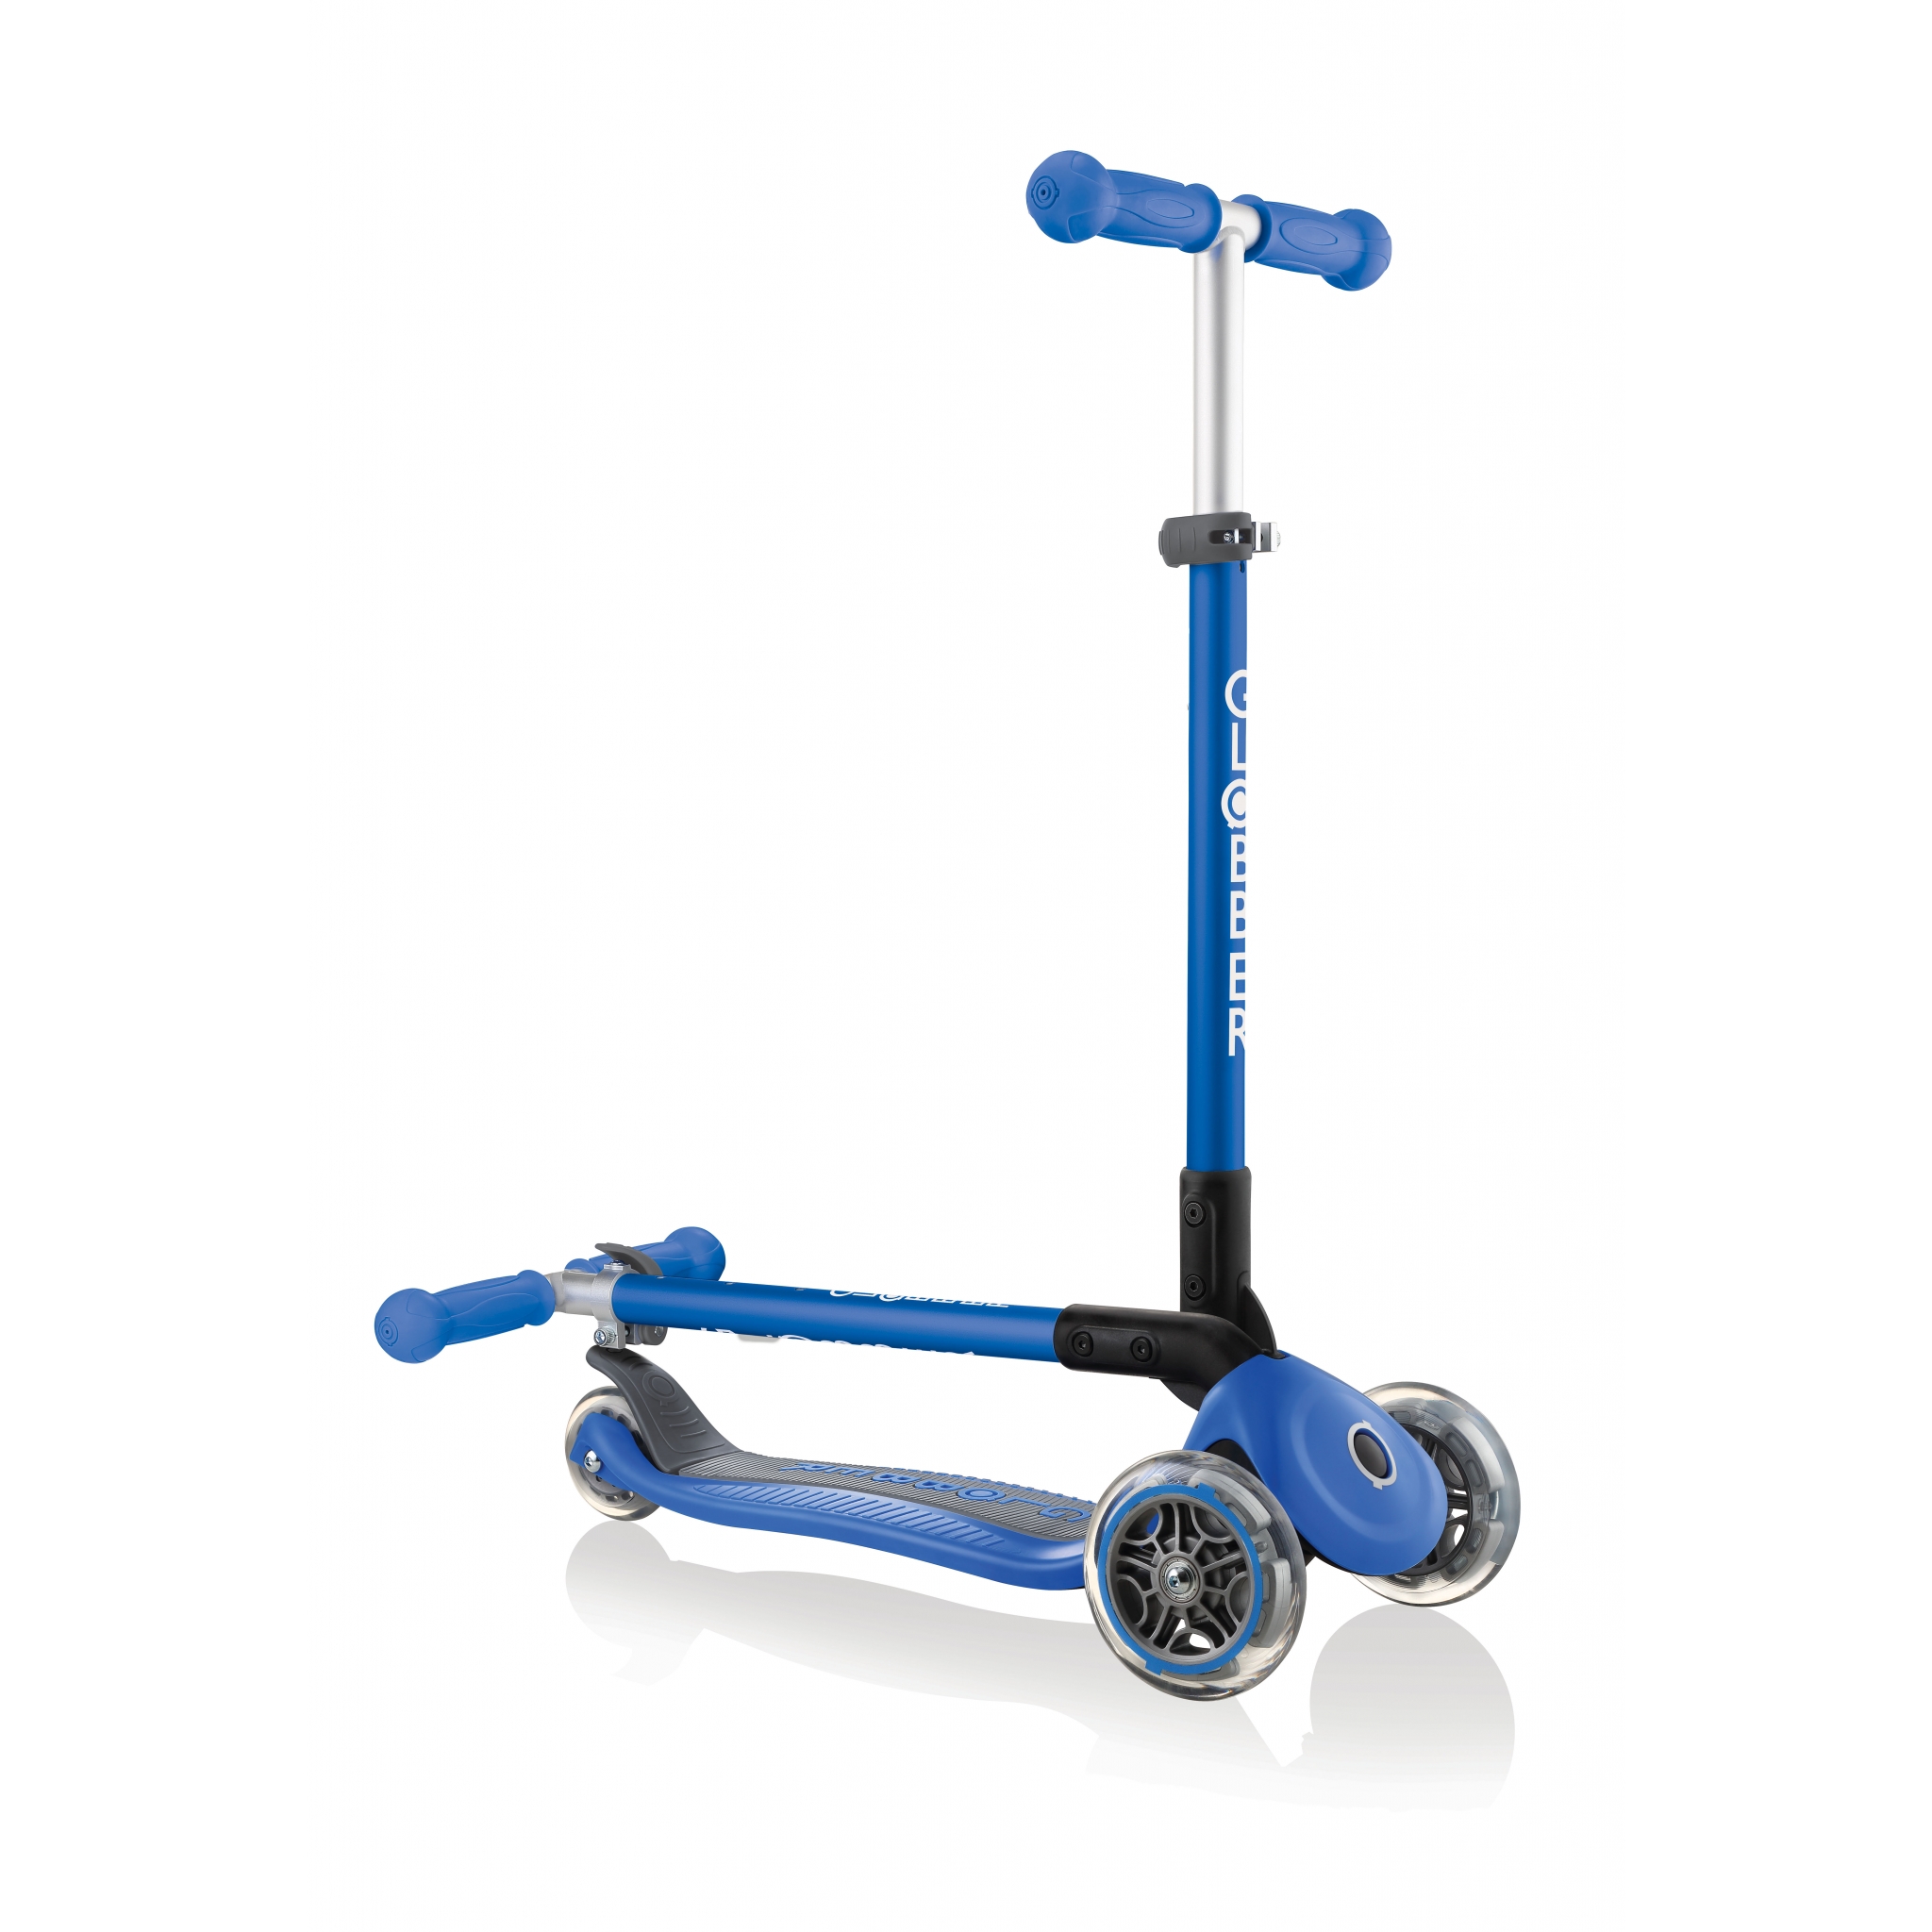 PRIMO-FOLDABLE-3-wheel-fold-up-scooter-for-kids-navy-blue 0